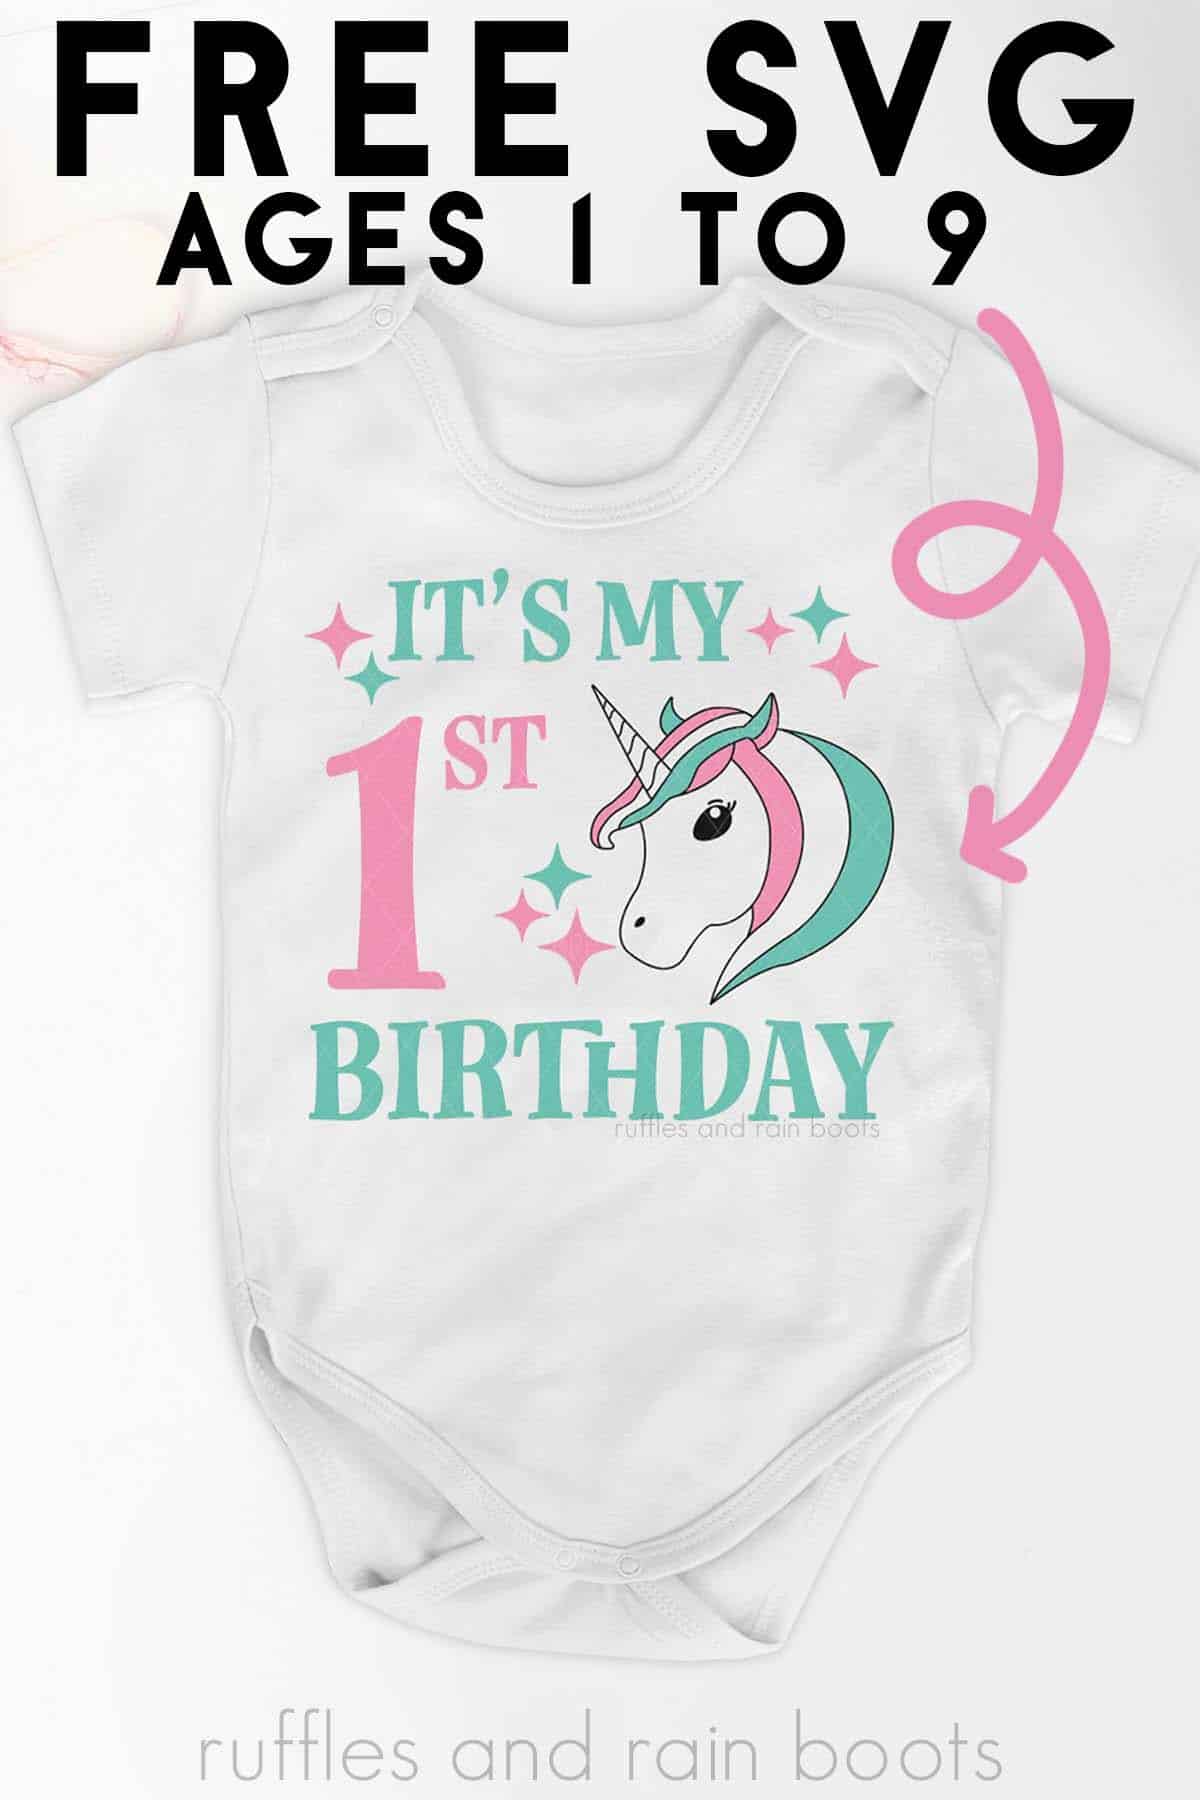 Vertical image of white baby body suit which reads it's my 1st birthday with free unicorn SVG ages 1 to 9 text.